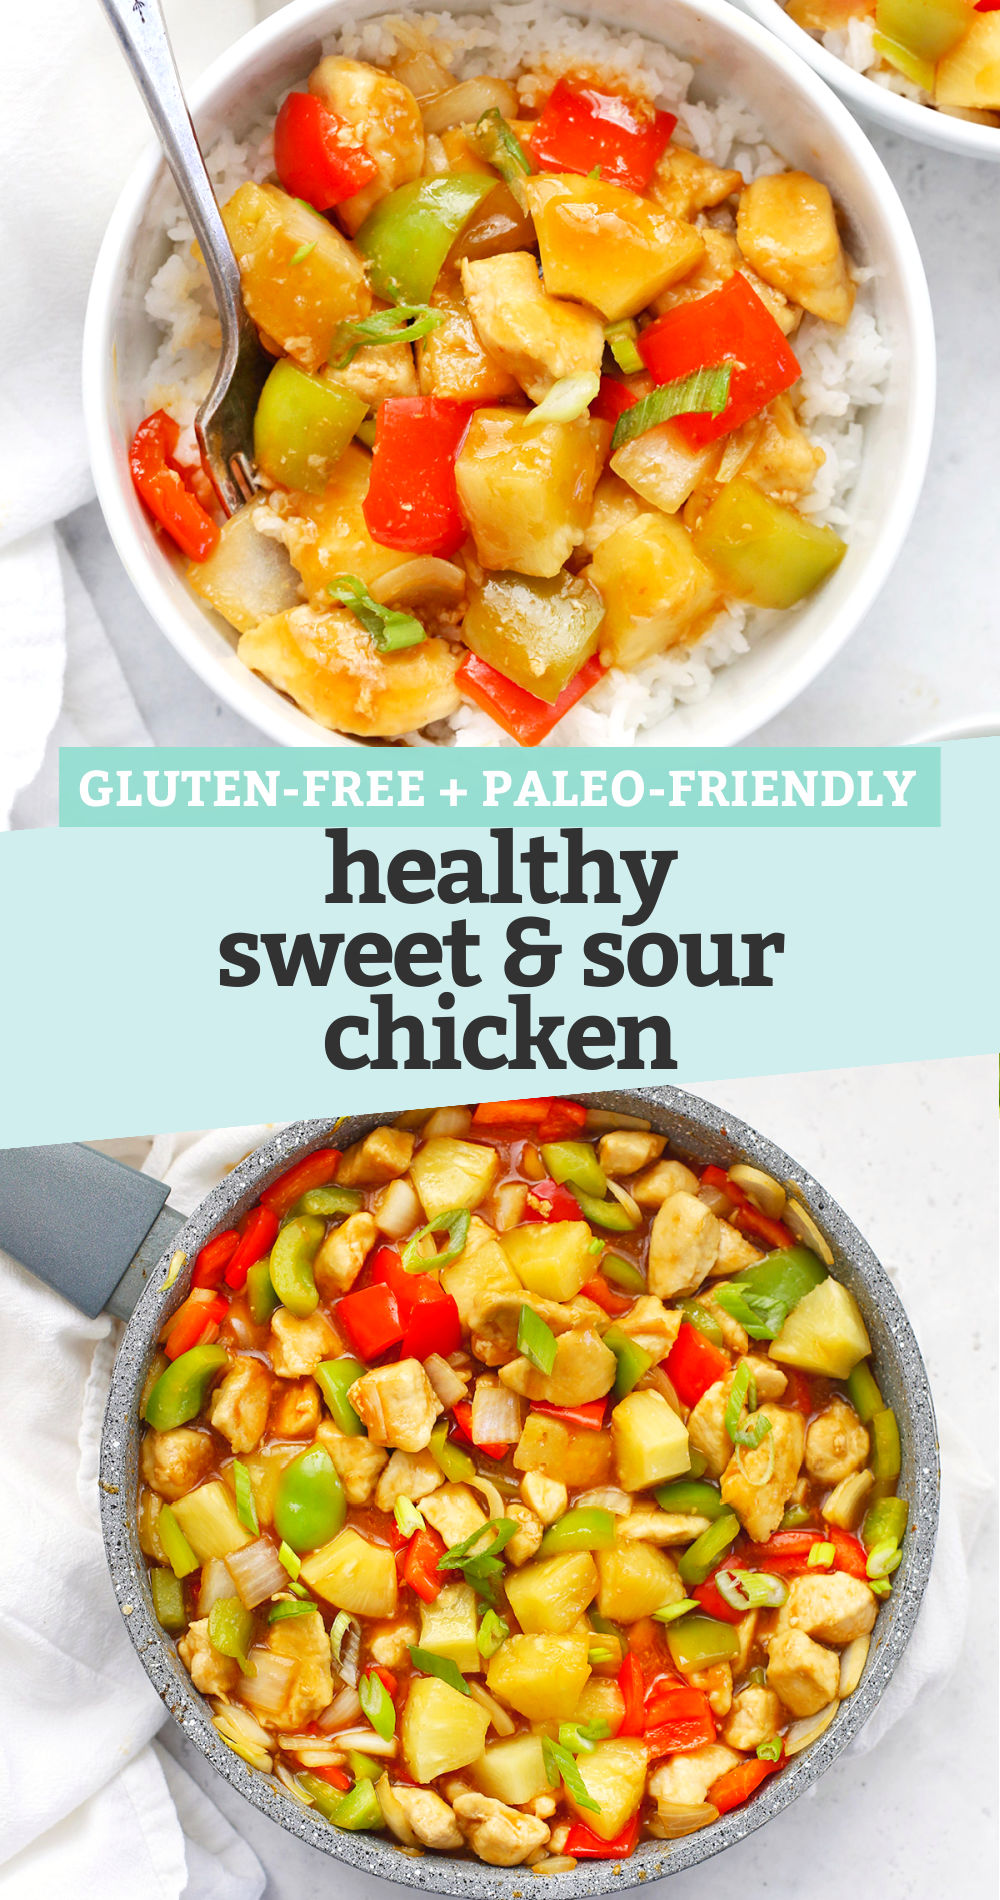 Collage of images of healthy sweet and sour chicken with text overlay that says "Gluten-Free + Paleo-Friendly Healthy Sweet & Sour Chicken"